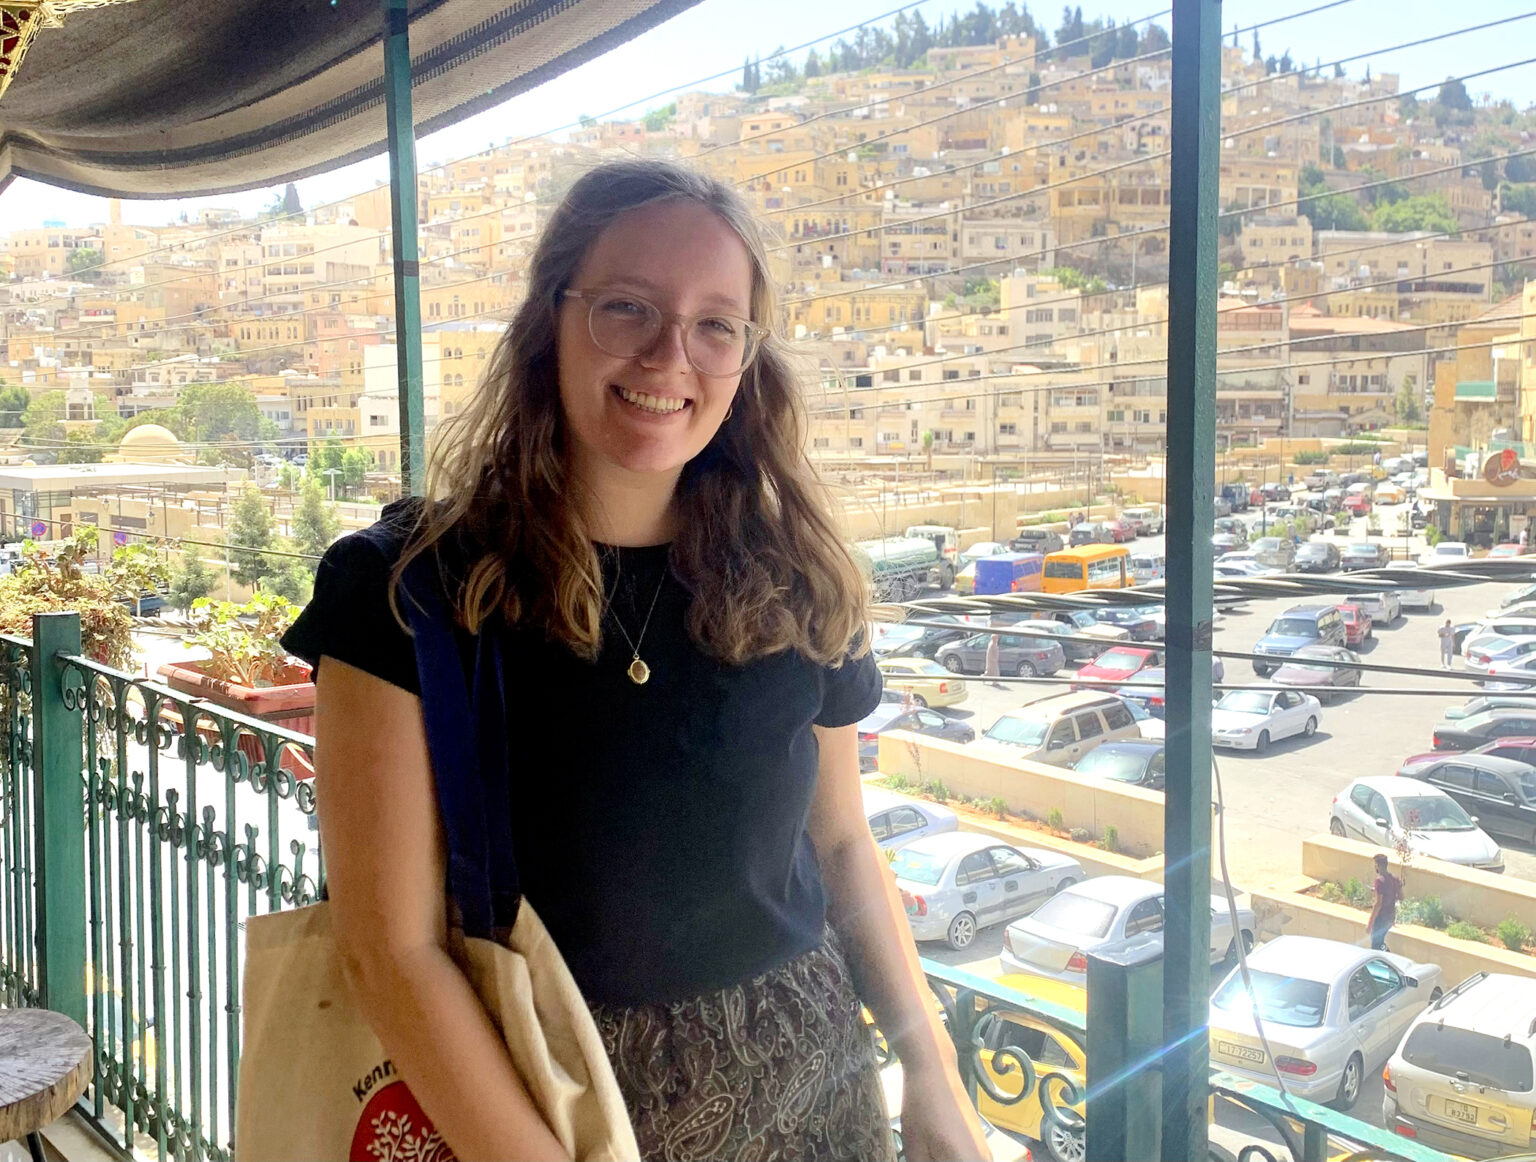 Leah Whitmoyer, a junior at the University of Georgia, is spending the fall 2022 semester studying at the University of Jordan as a Boren Scholar. In this photo, she visits Assalt, Jordan, a city near Amman. (Submitted photo)